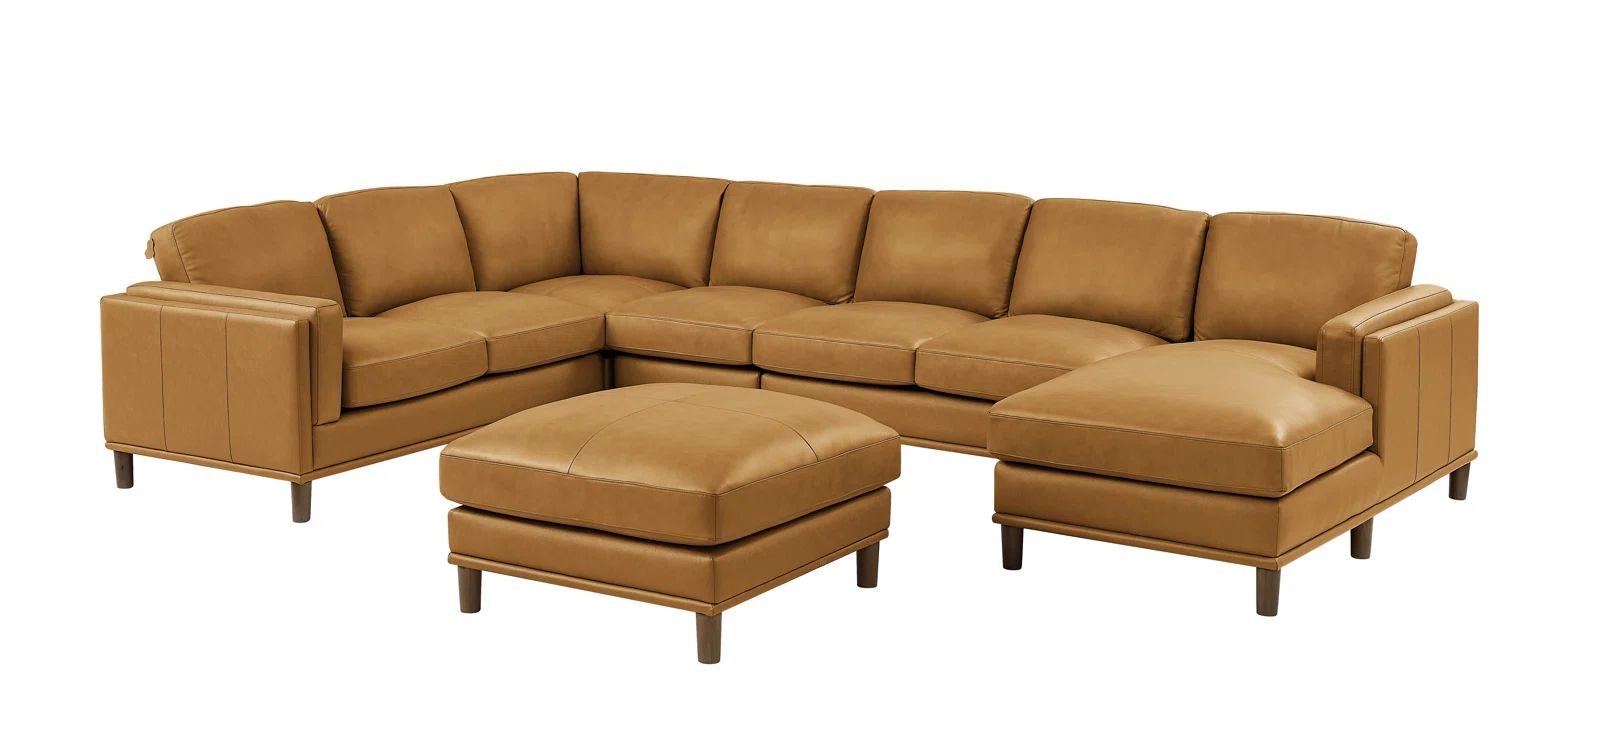 Agatina 148" Wide Leather Match Left Hand Facing Corner Sectional with Ottoman | Wayfair North America